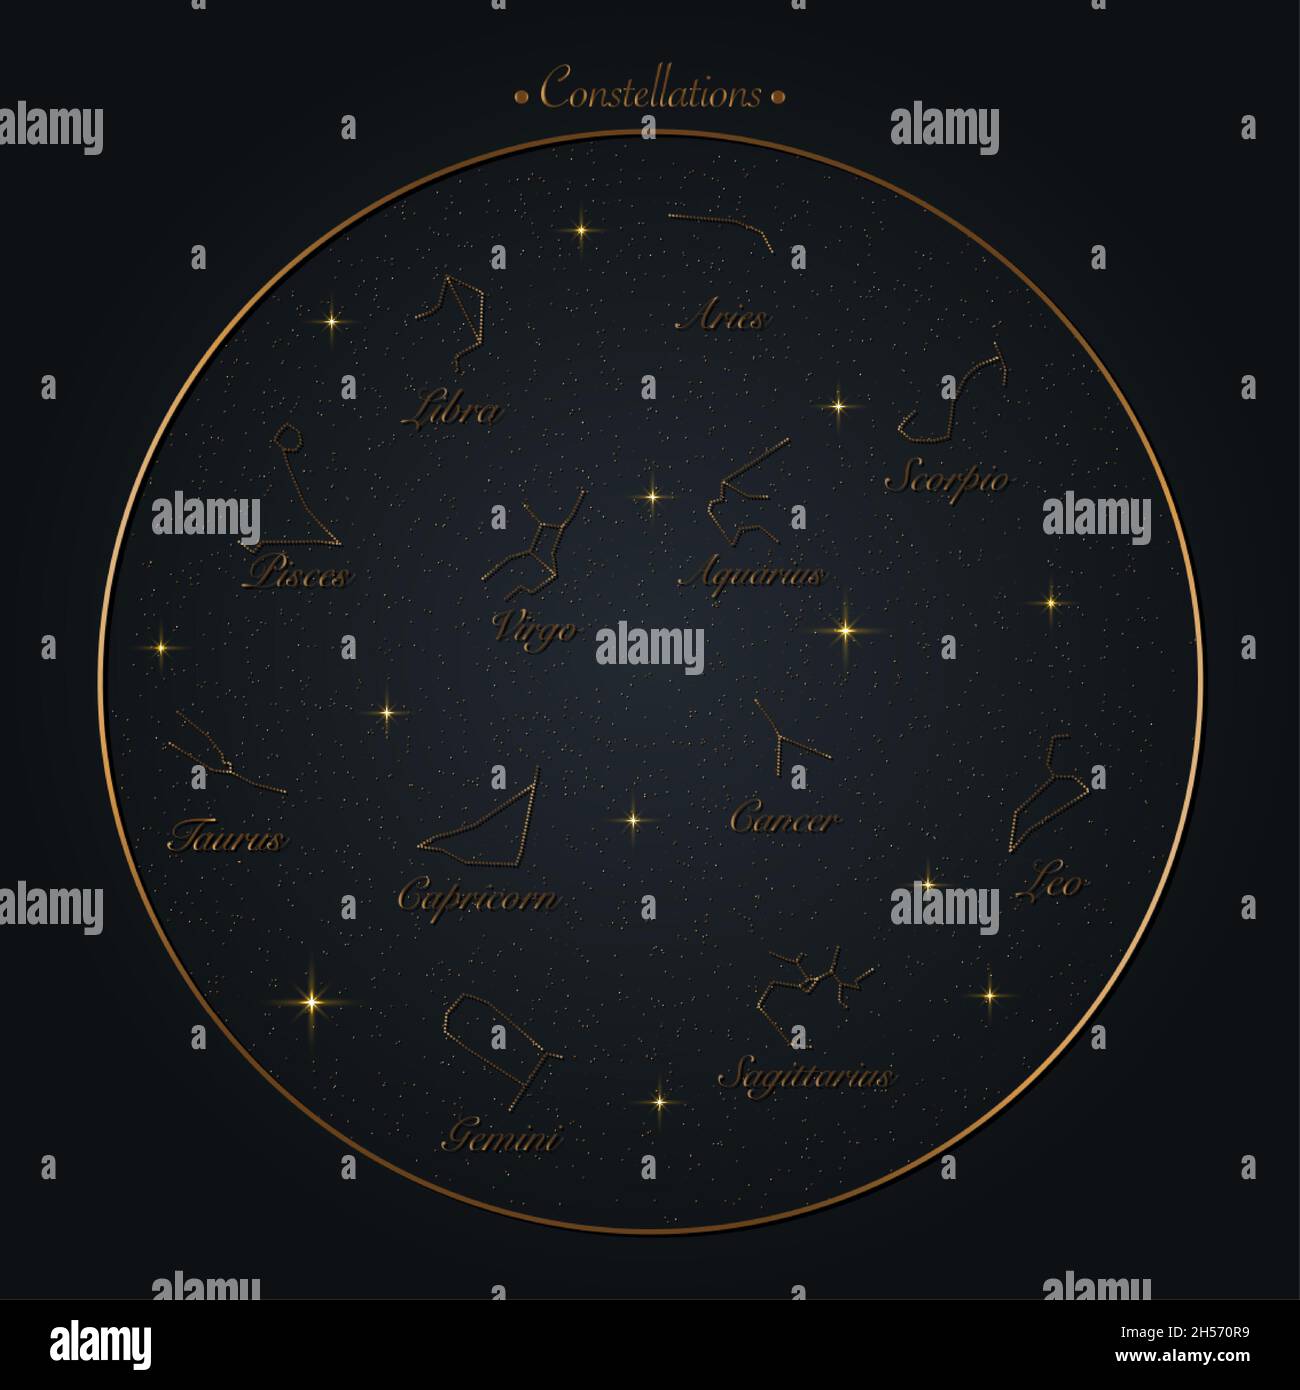 Zodiac wheel of constellations sign set, vector illustration. Astrological symbols with golden gradient effect. stars on night sky map background. Spa Stock Vector